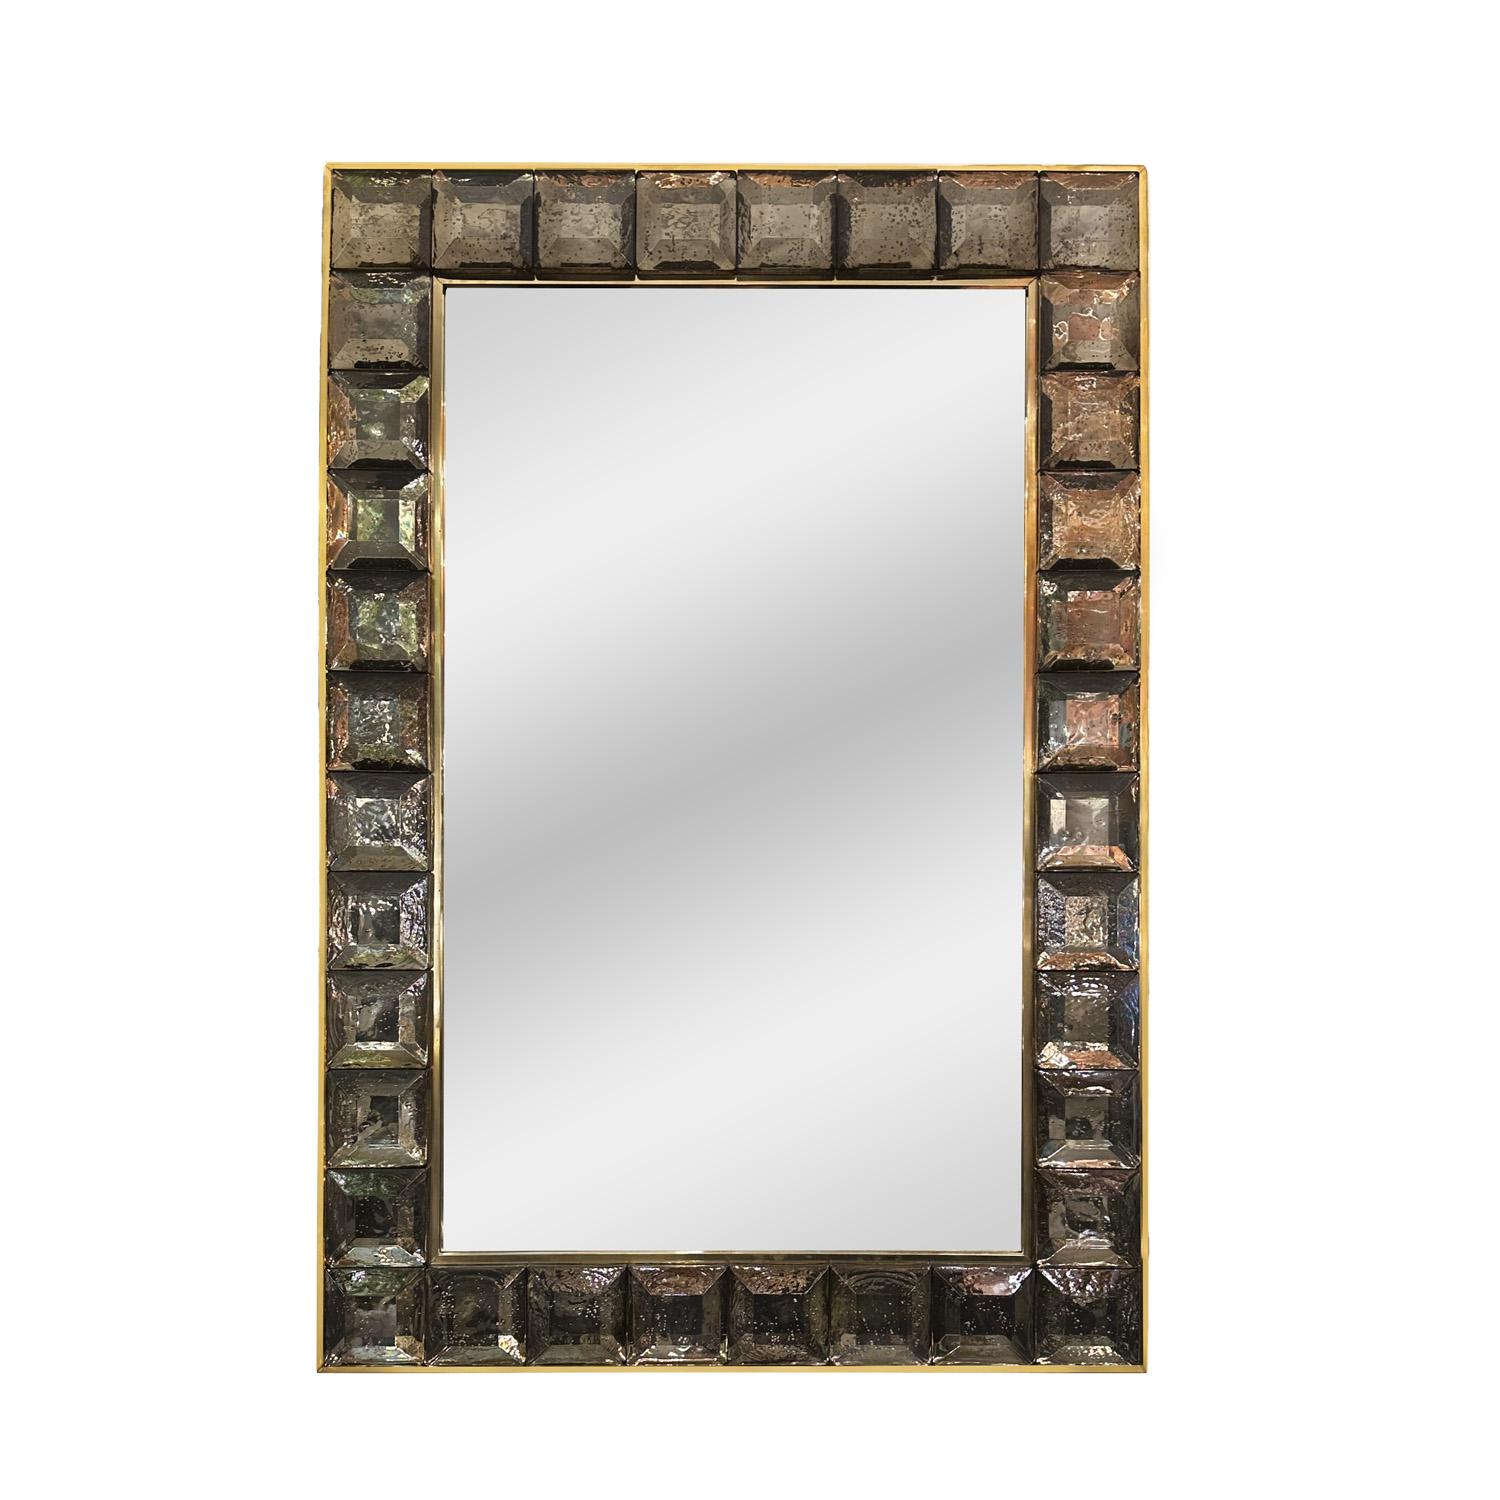 Custom hand crafted, smoke tinted Murano glass block and unlacquered brass framed mirror. Custom sizes available.